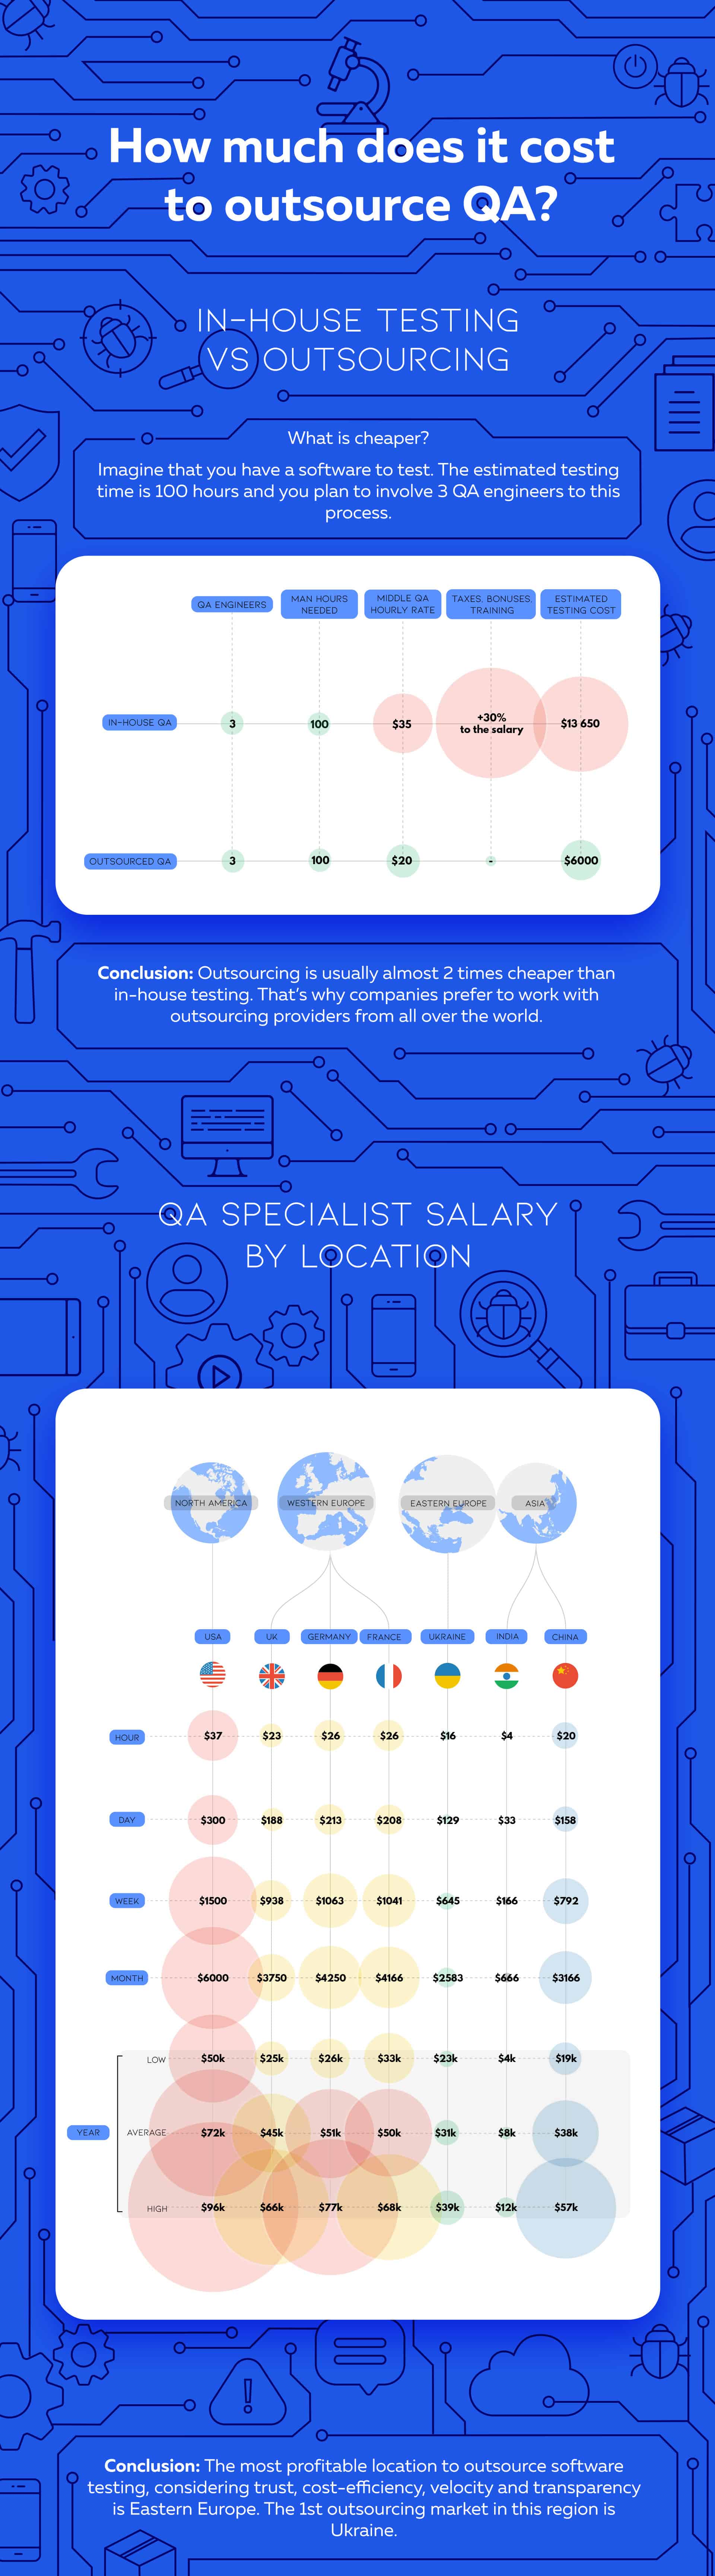 How Much Does it Cost to Outsource QA